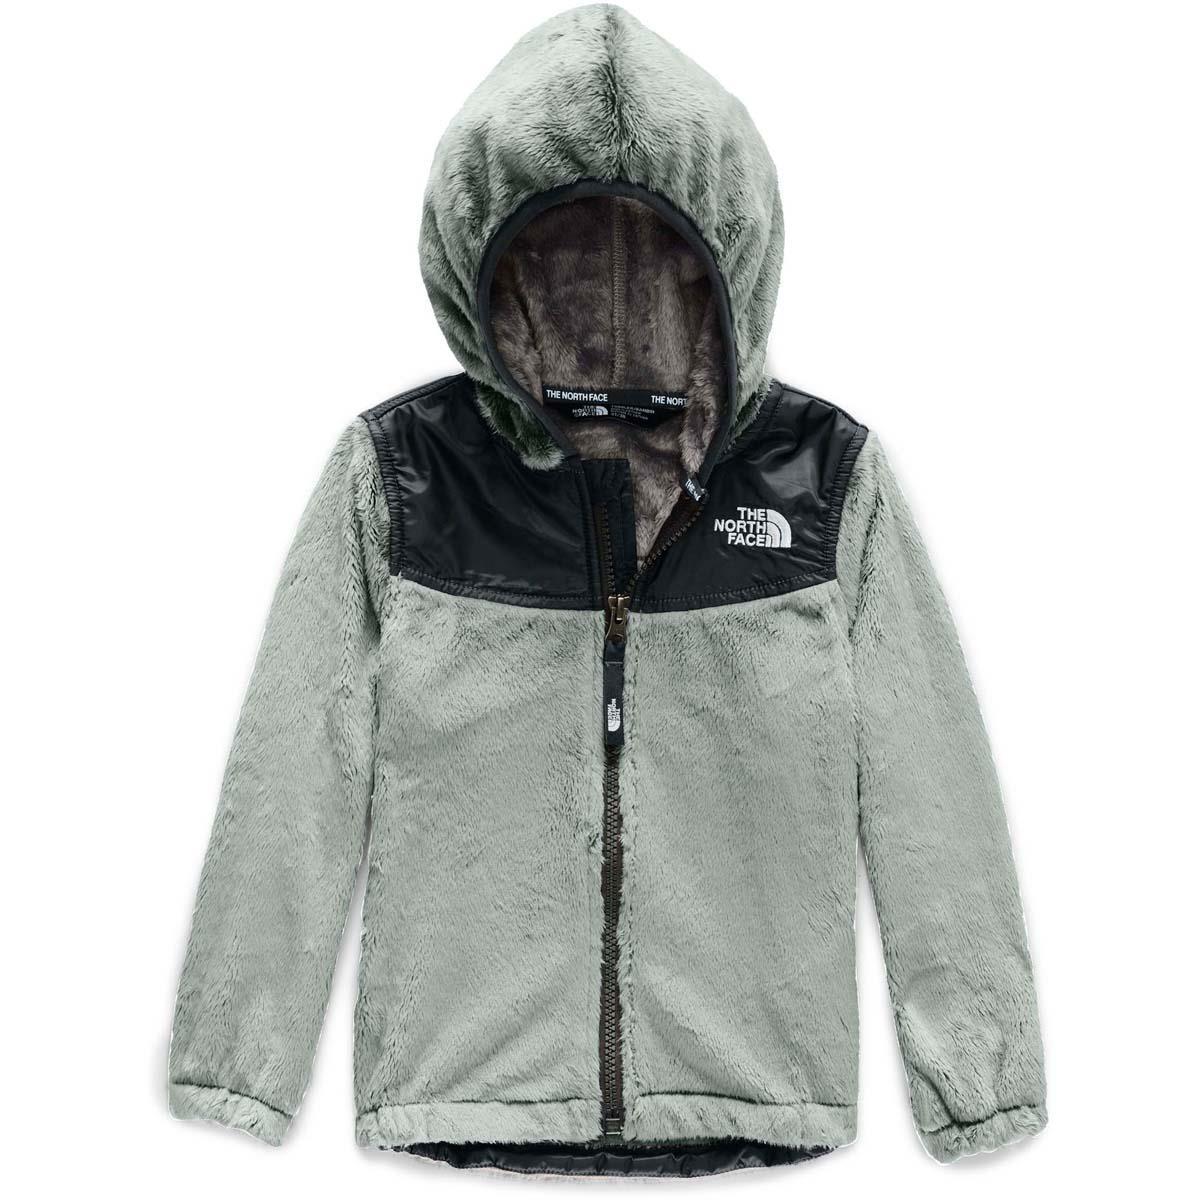 toddler 3t north face jacket